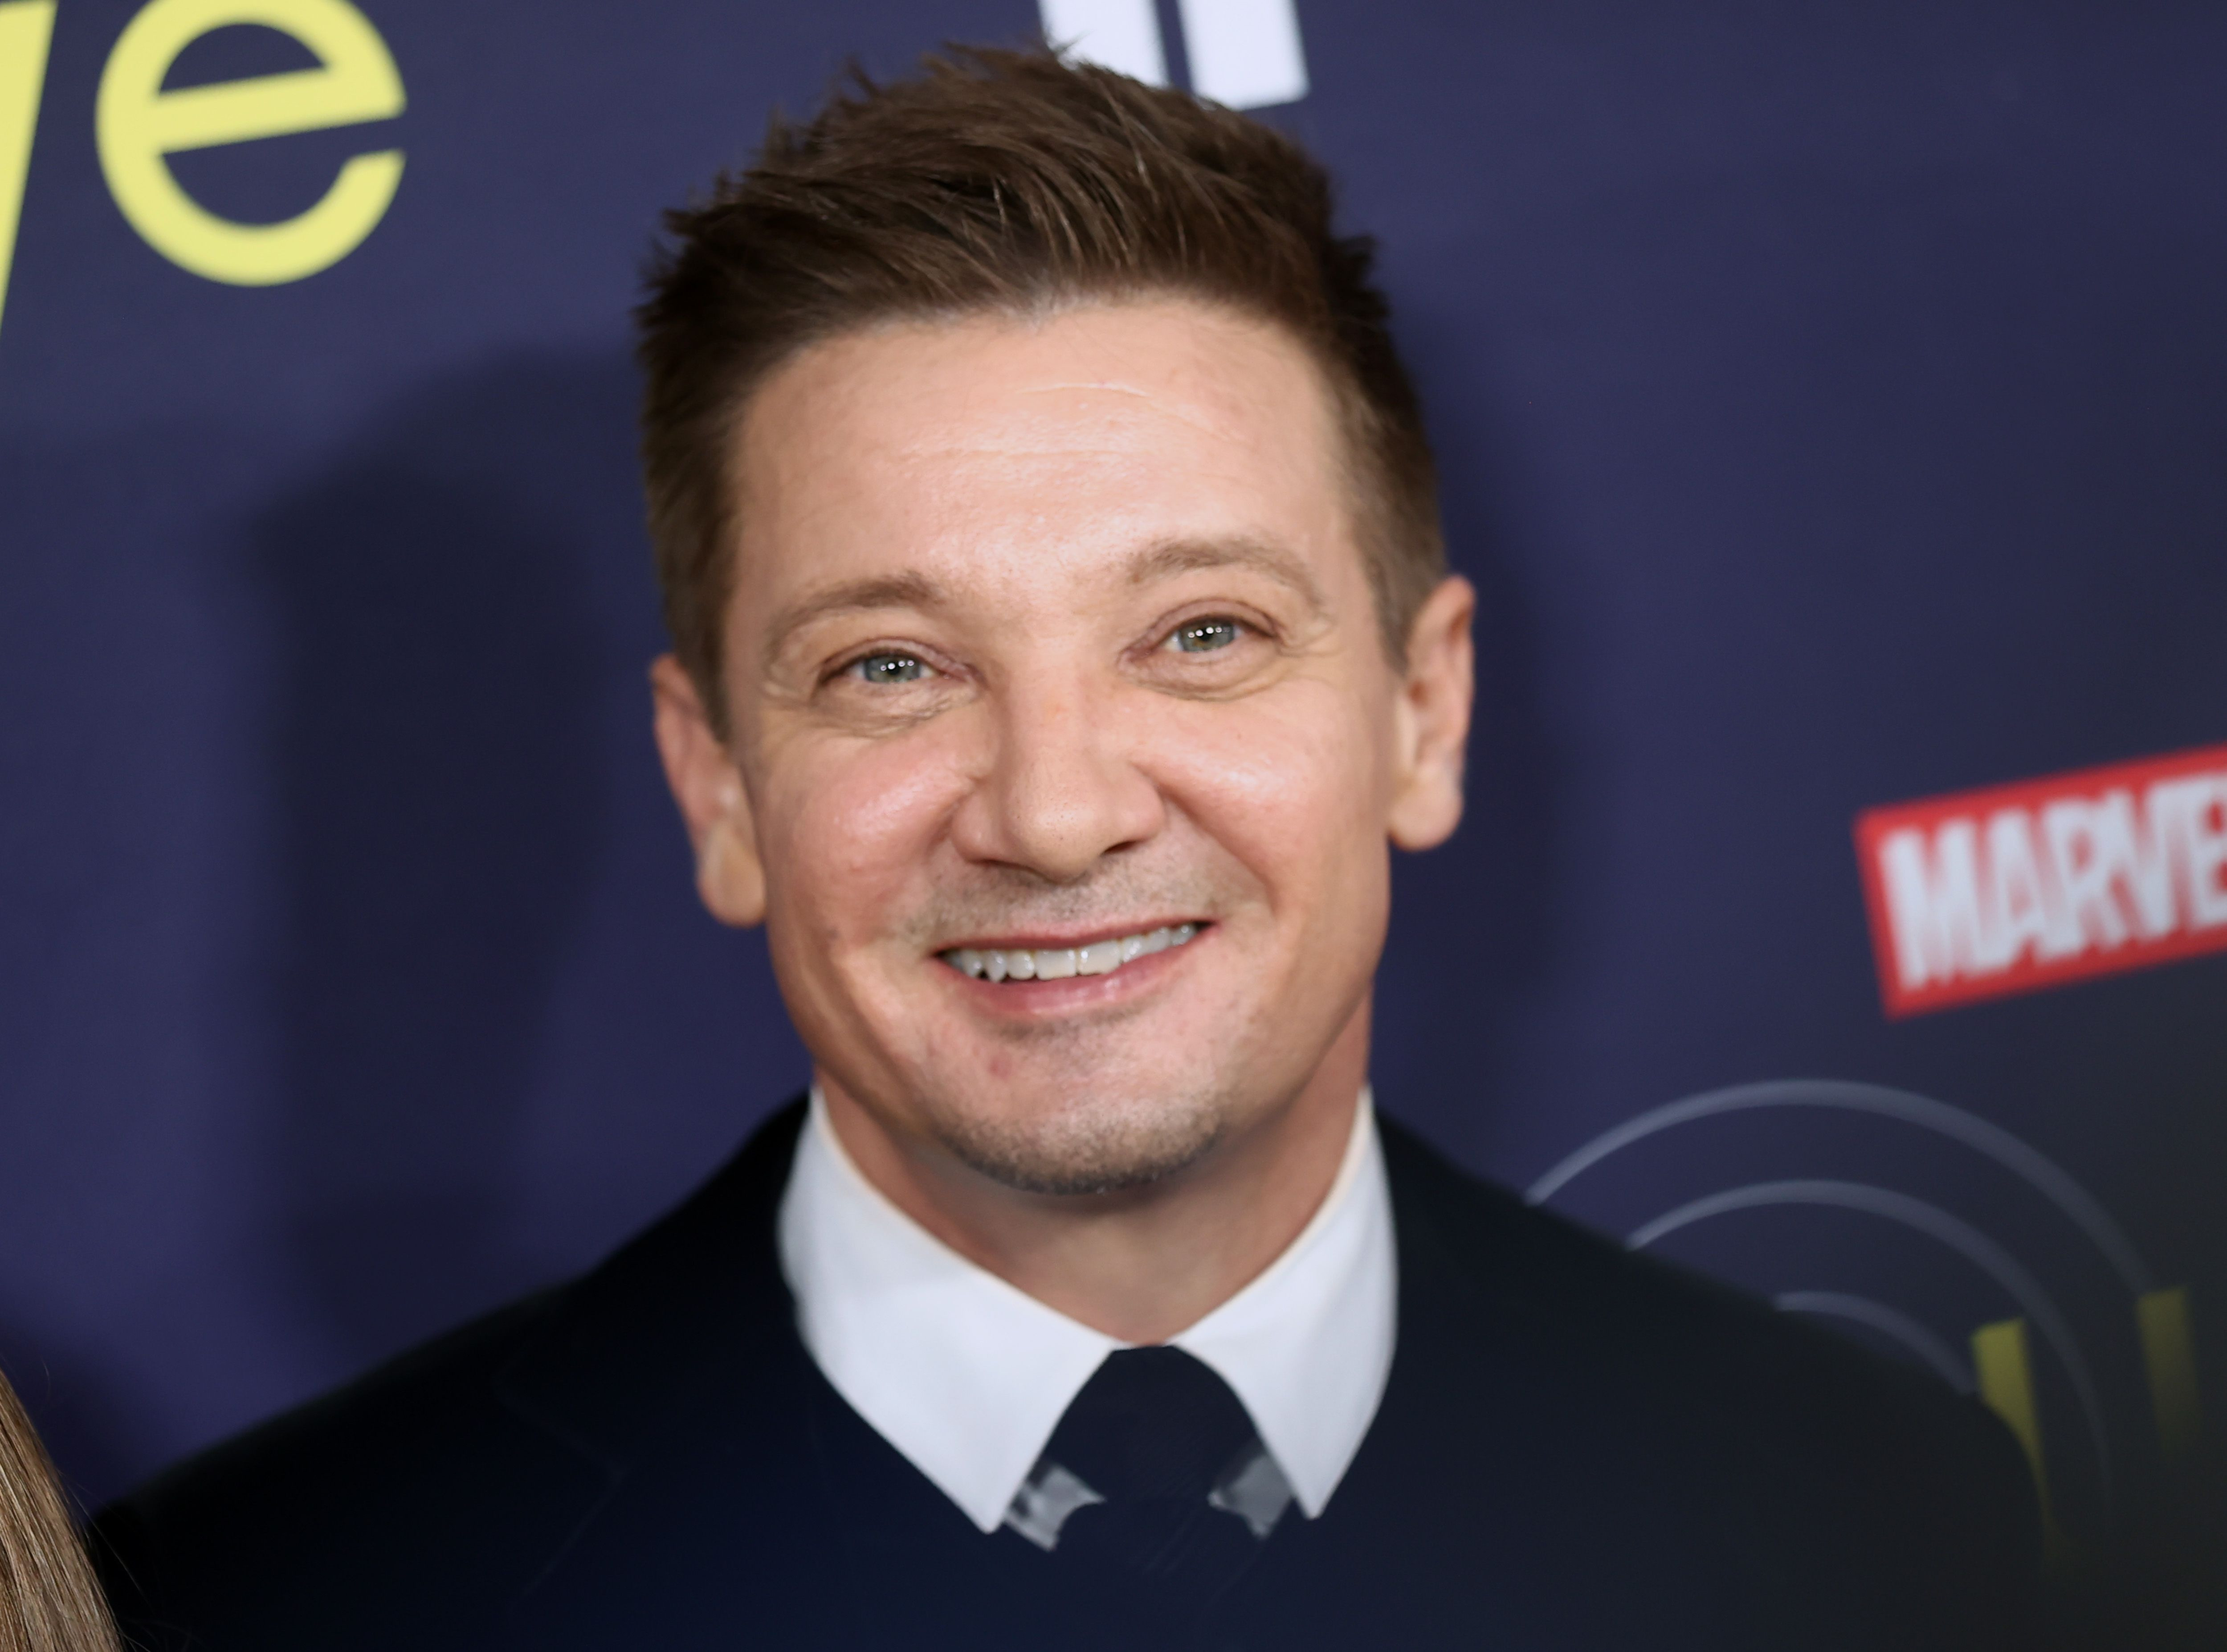 'Hawkeye' star Jeremy Renner wearing a white collared shirt and black suit. He's smiling at the camera and standing in front of a wall with the Disney+ show's logo.